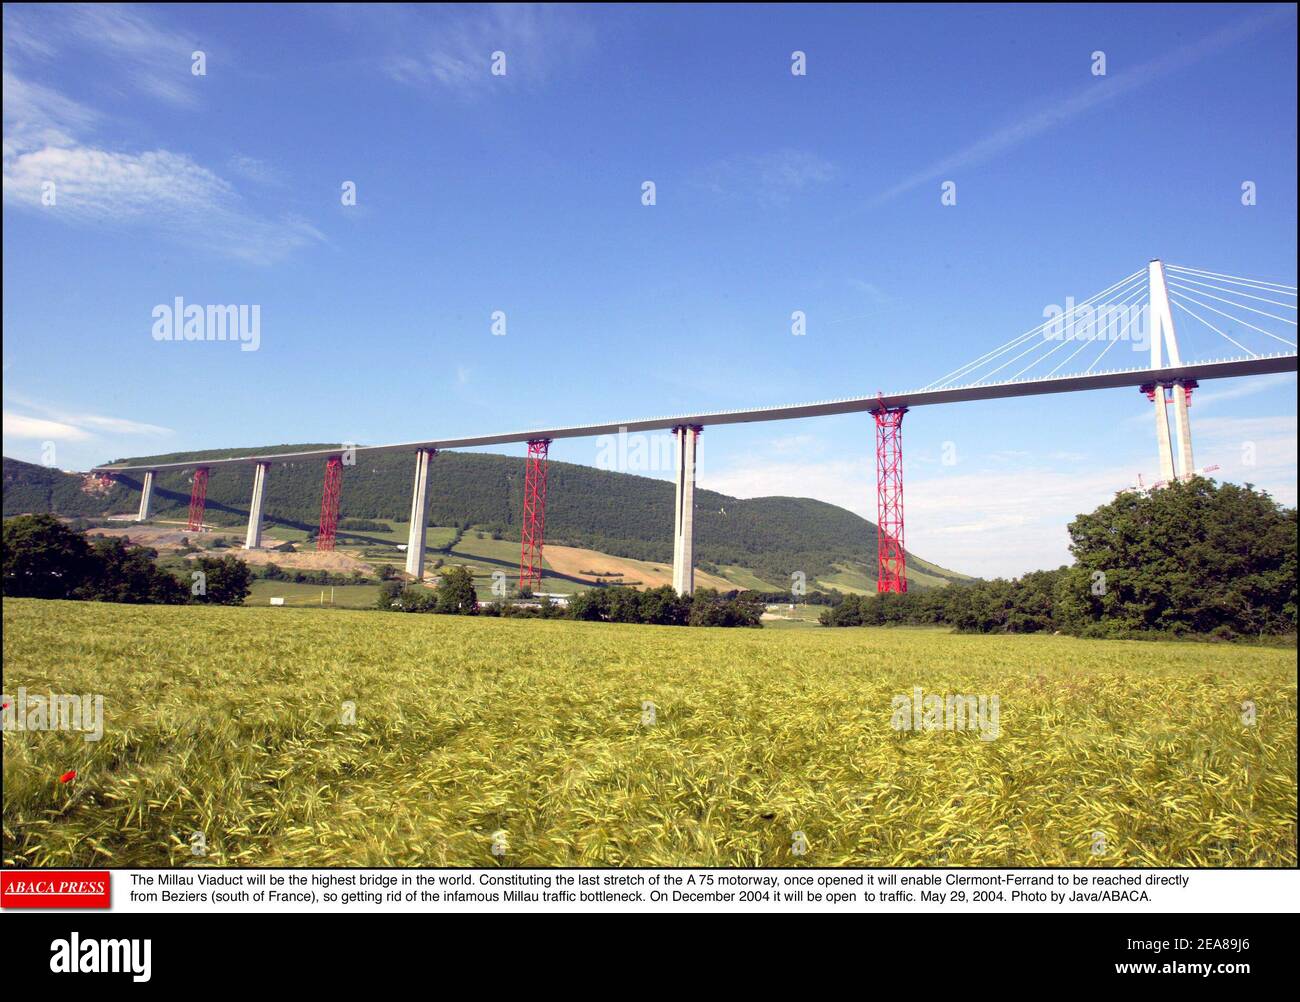 The Millau Viaduct will be the highest bridge in the world. Constituting the last stretch of the A 75 motorway, once opened it will enable Clermont-Ferrand to be reached directly from Beziers (south of France), so getting rid of the infamous Millau traffic bottleneck. On December 2004 it will be open to traffic. May 29, 2004. Photo by Java/ABACA. Stock Photo